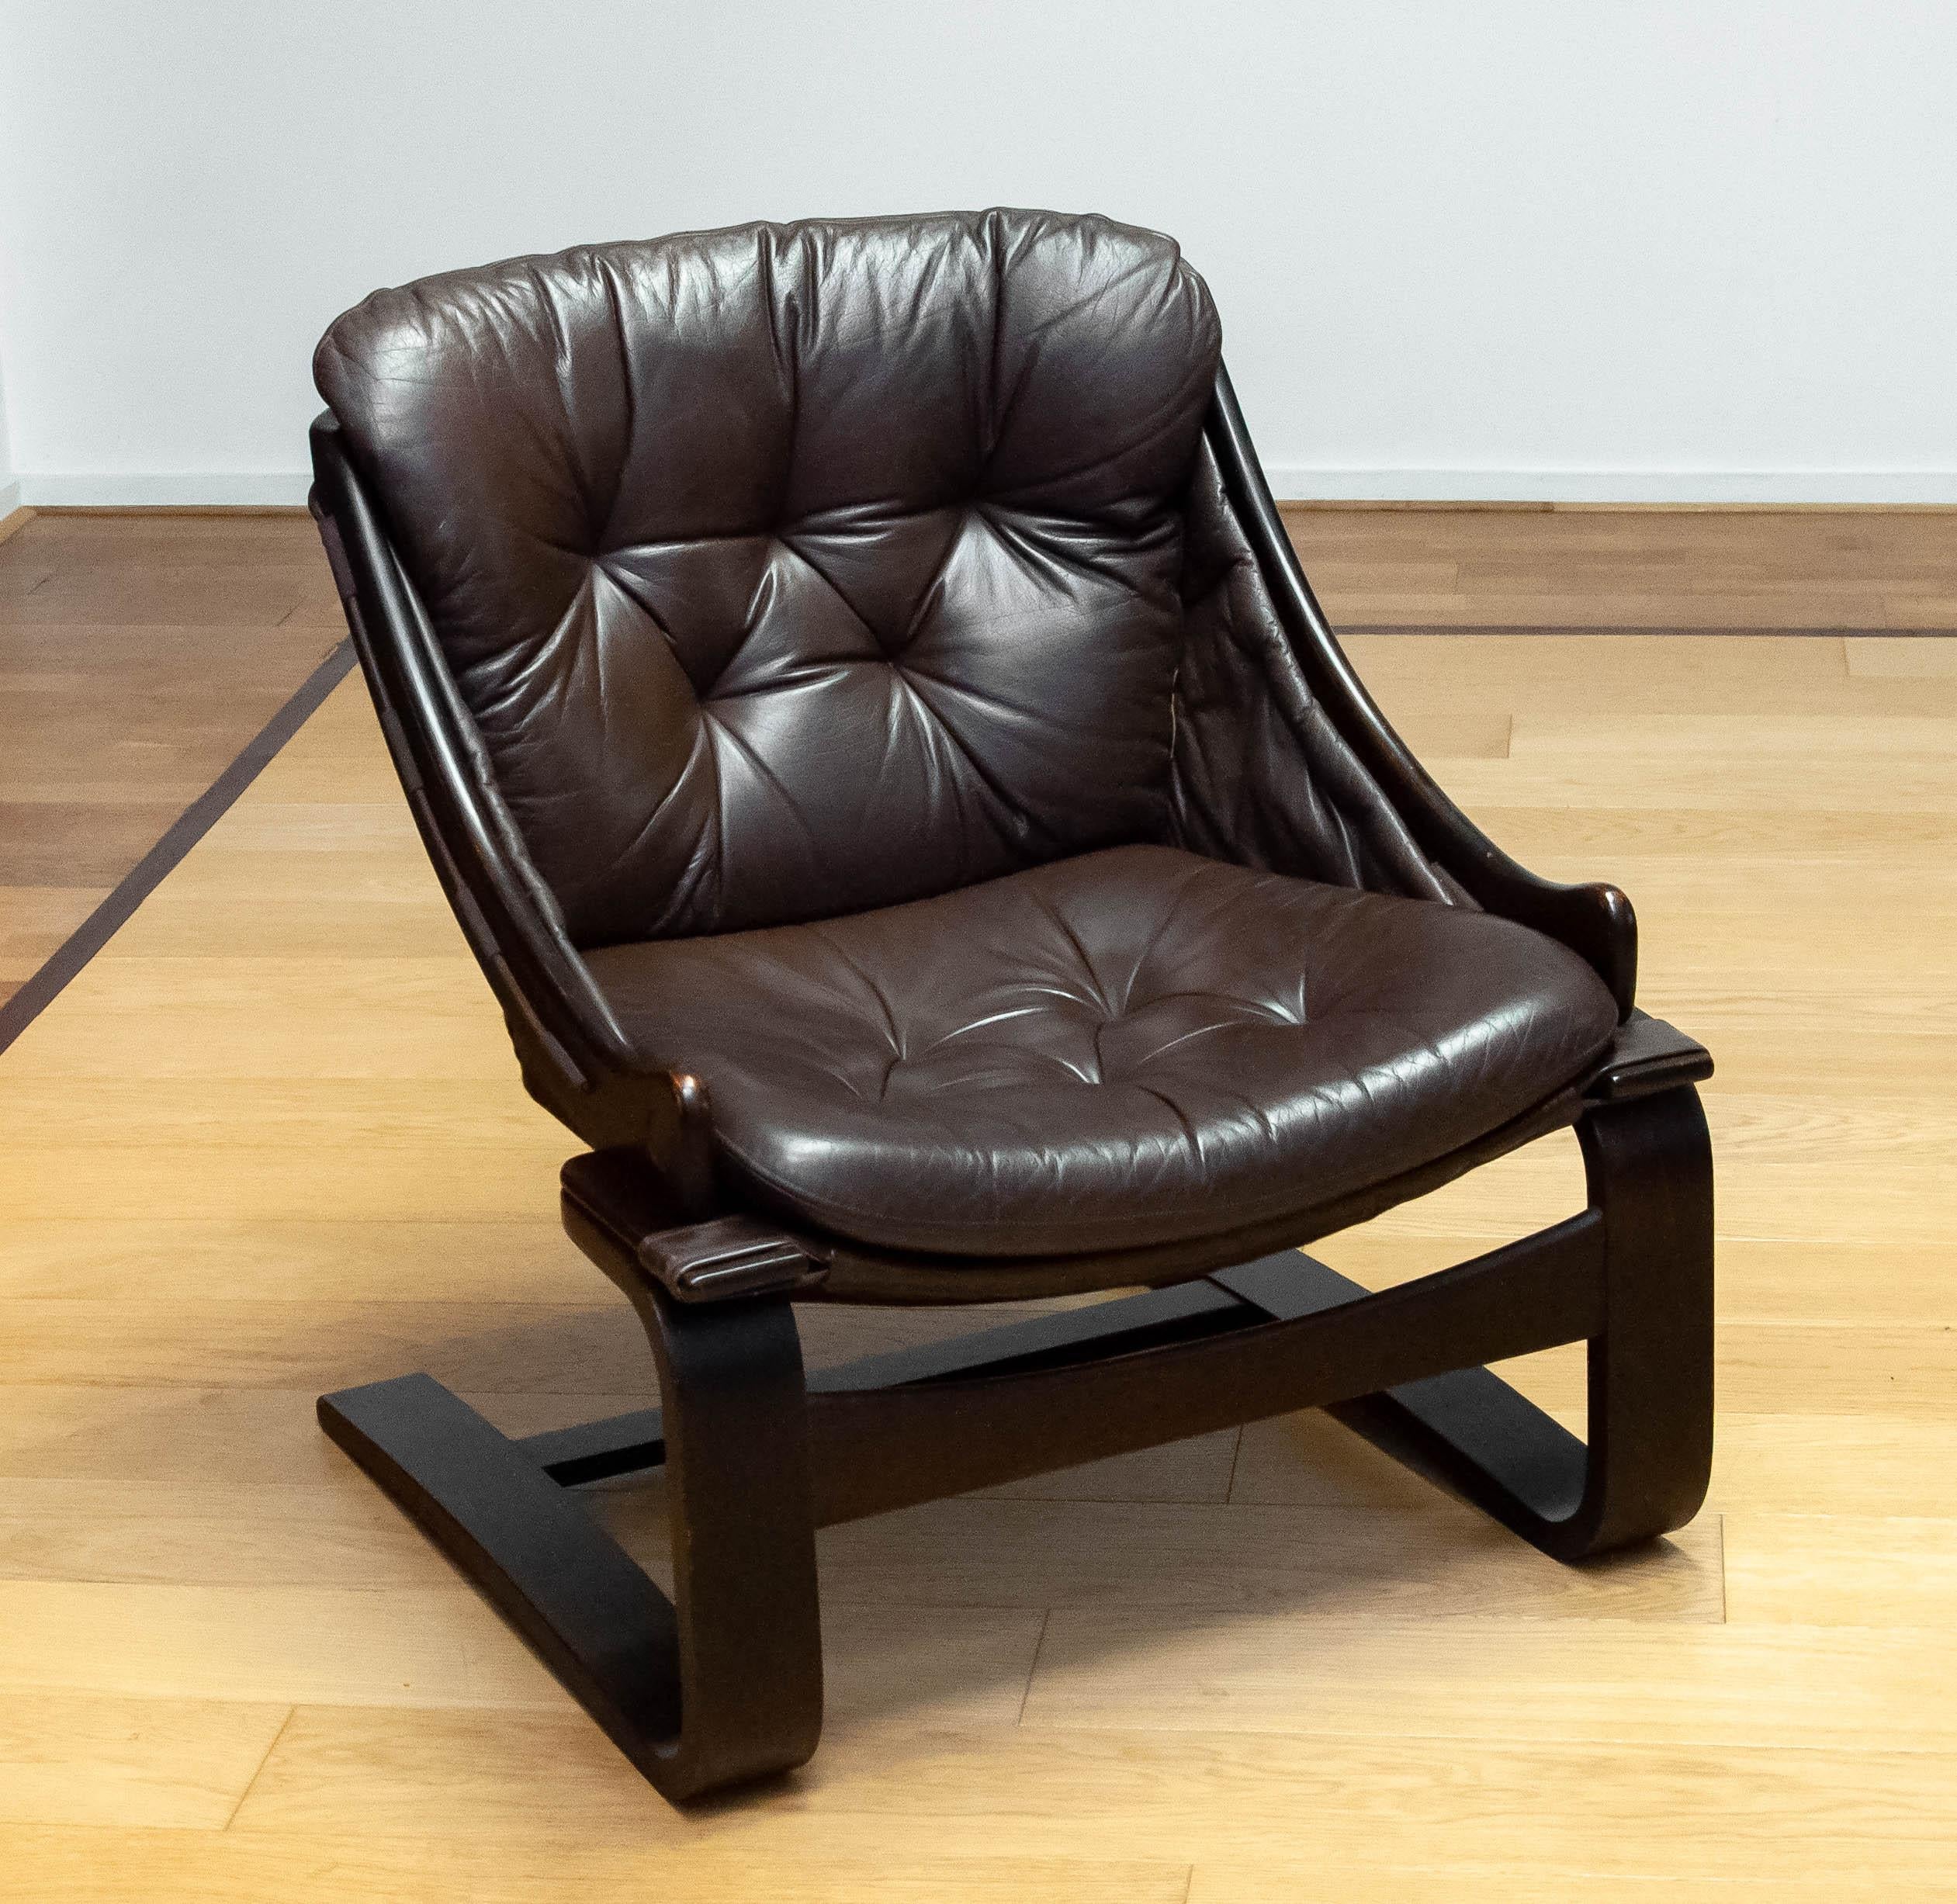 Scandinavian Modern 1970s Brown Leather Lounge Chair Model 'Krona' By Ake Fribytter For Nelo, Sweden For Sale